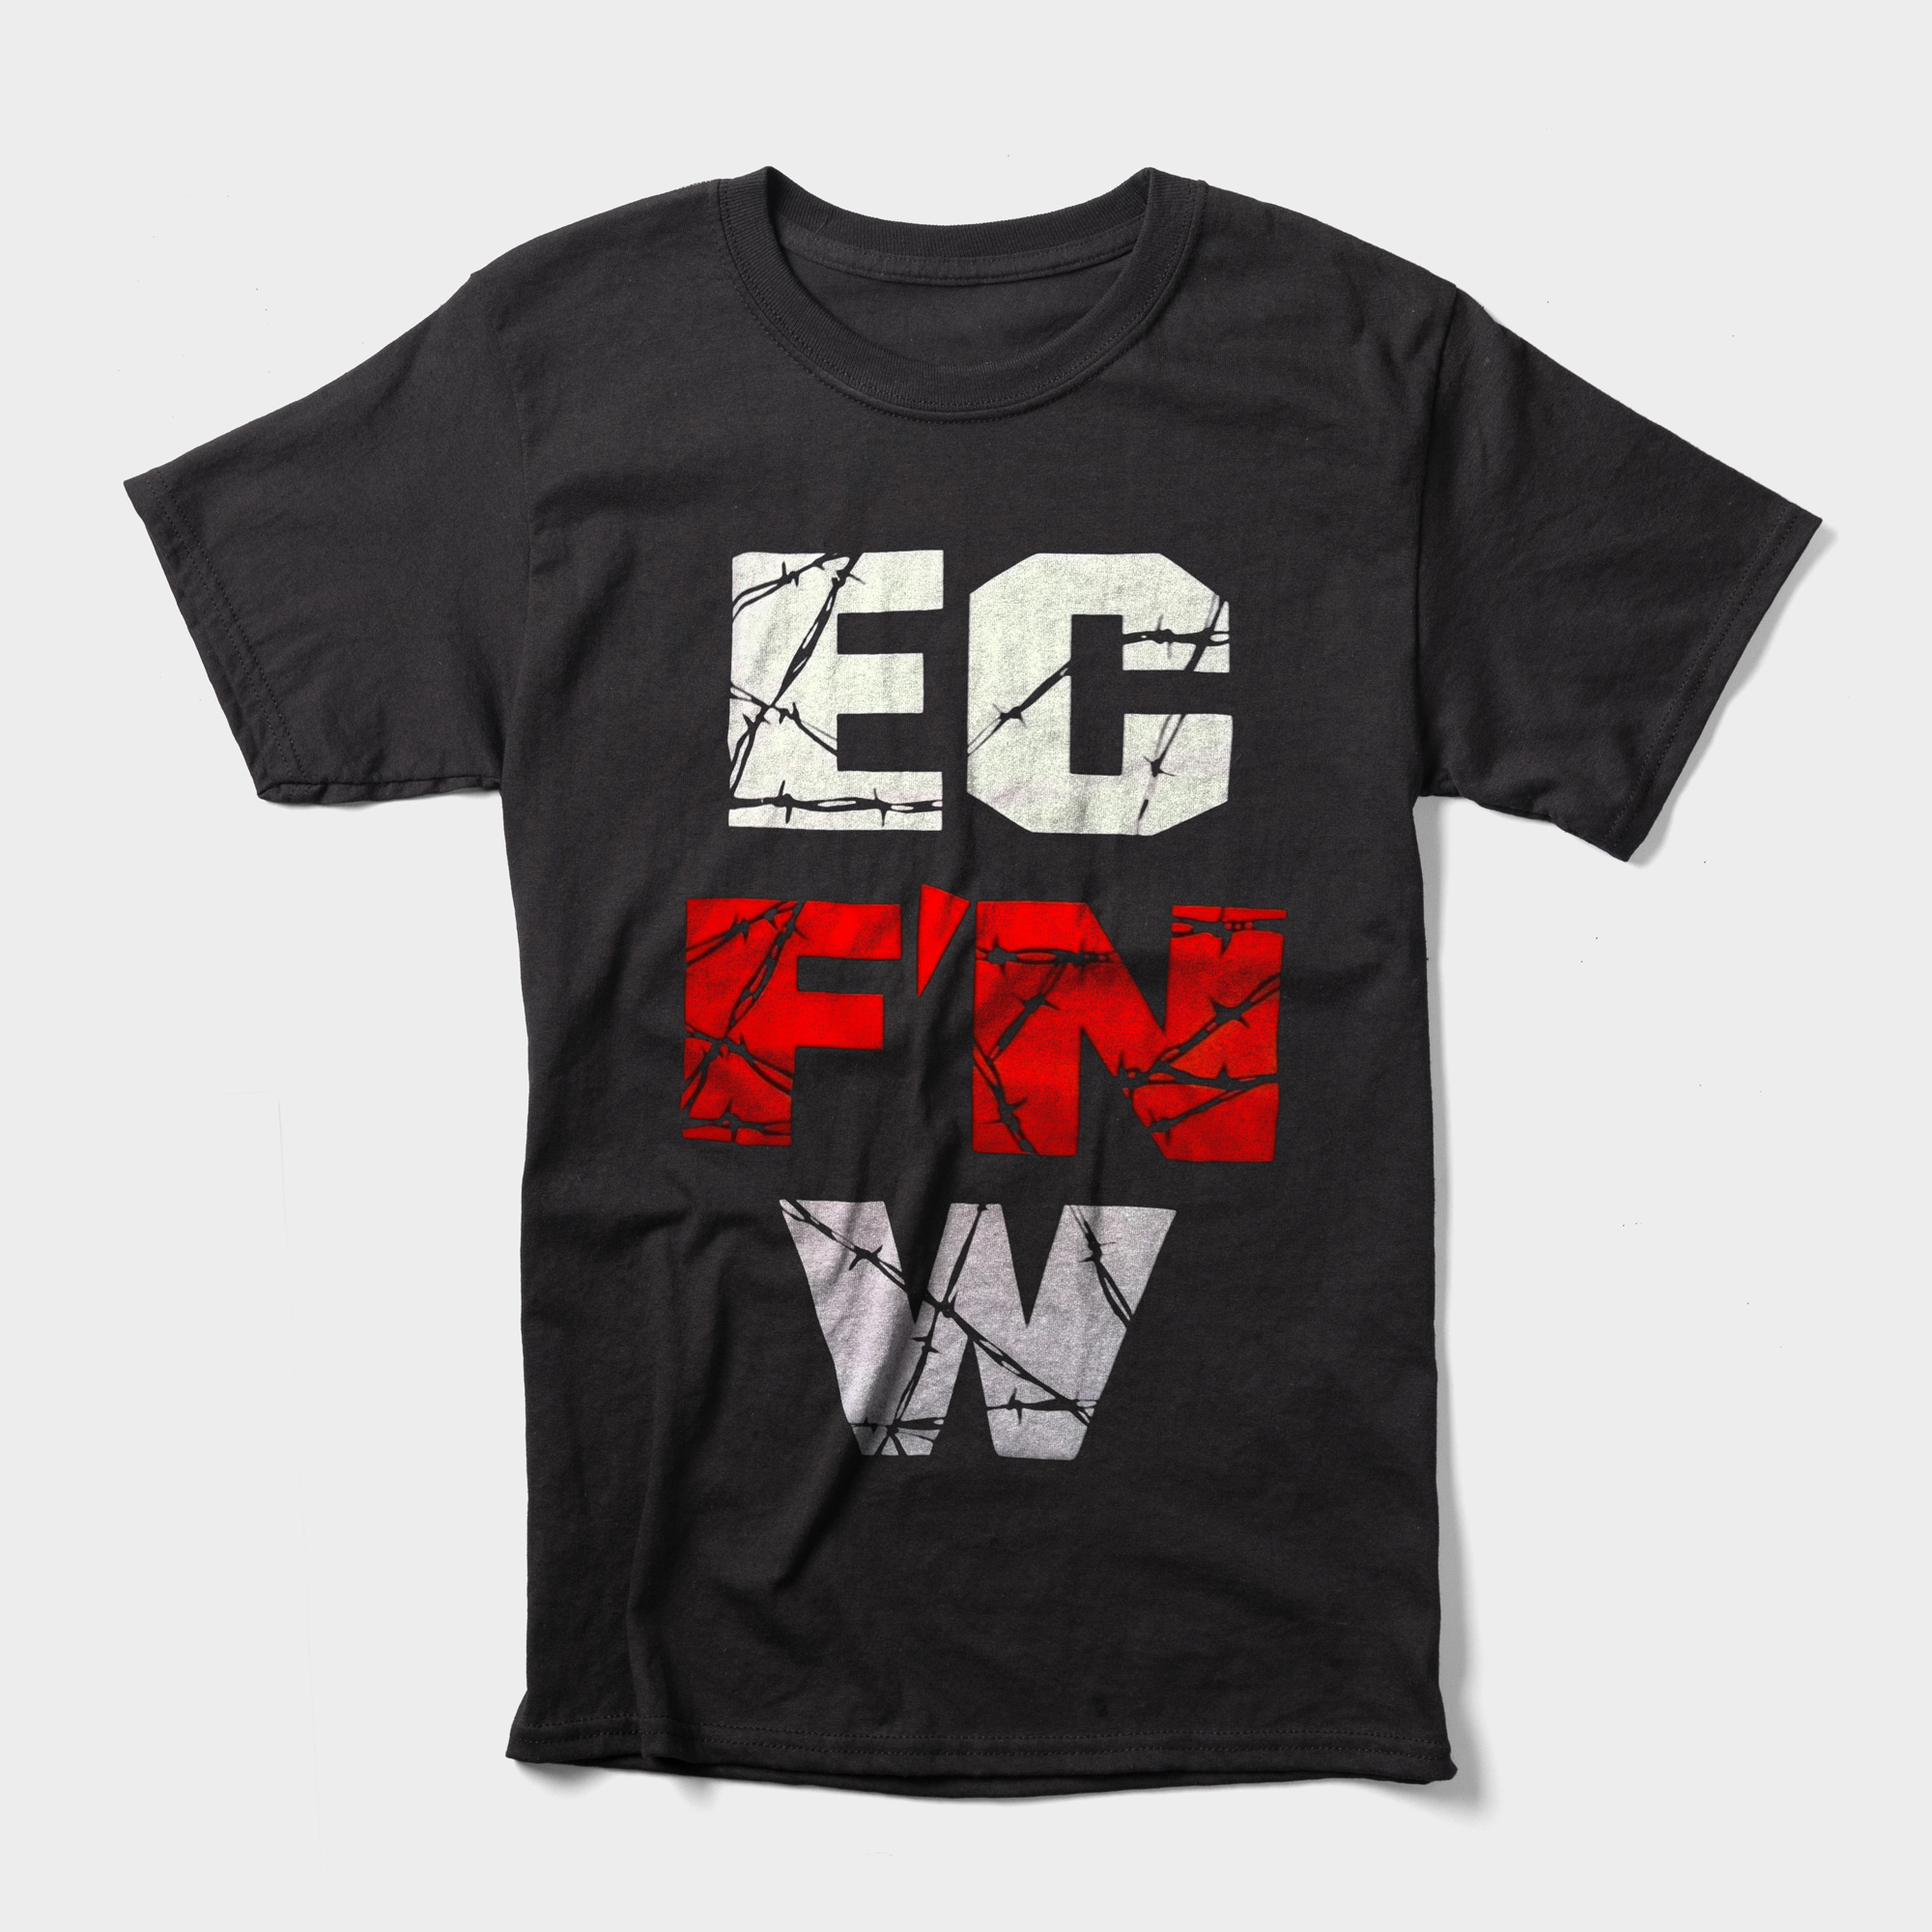 ECW's "EC F'n W" t-shirt is as bold and in-your-face as the promotion itself. 